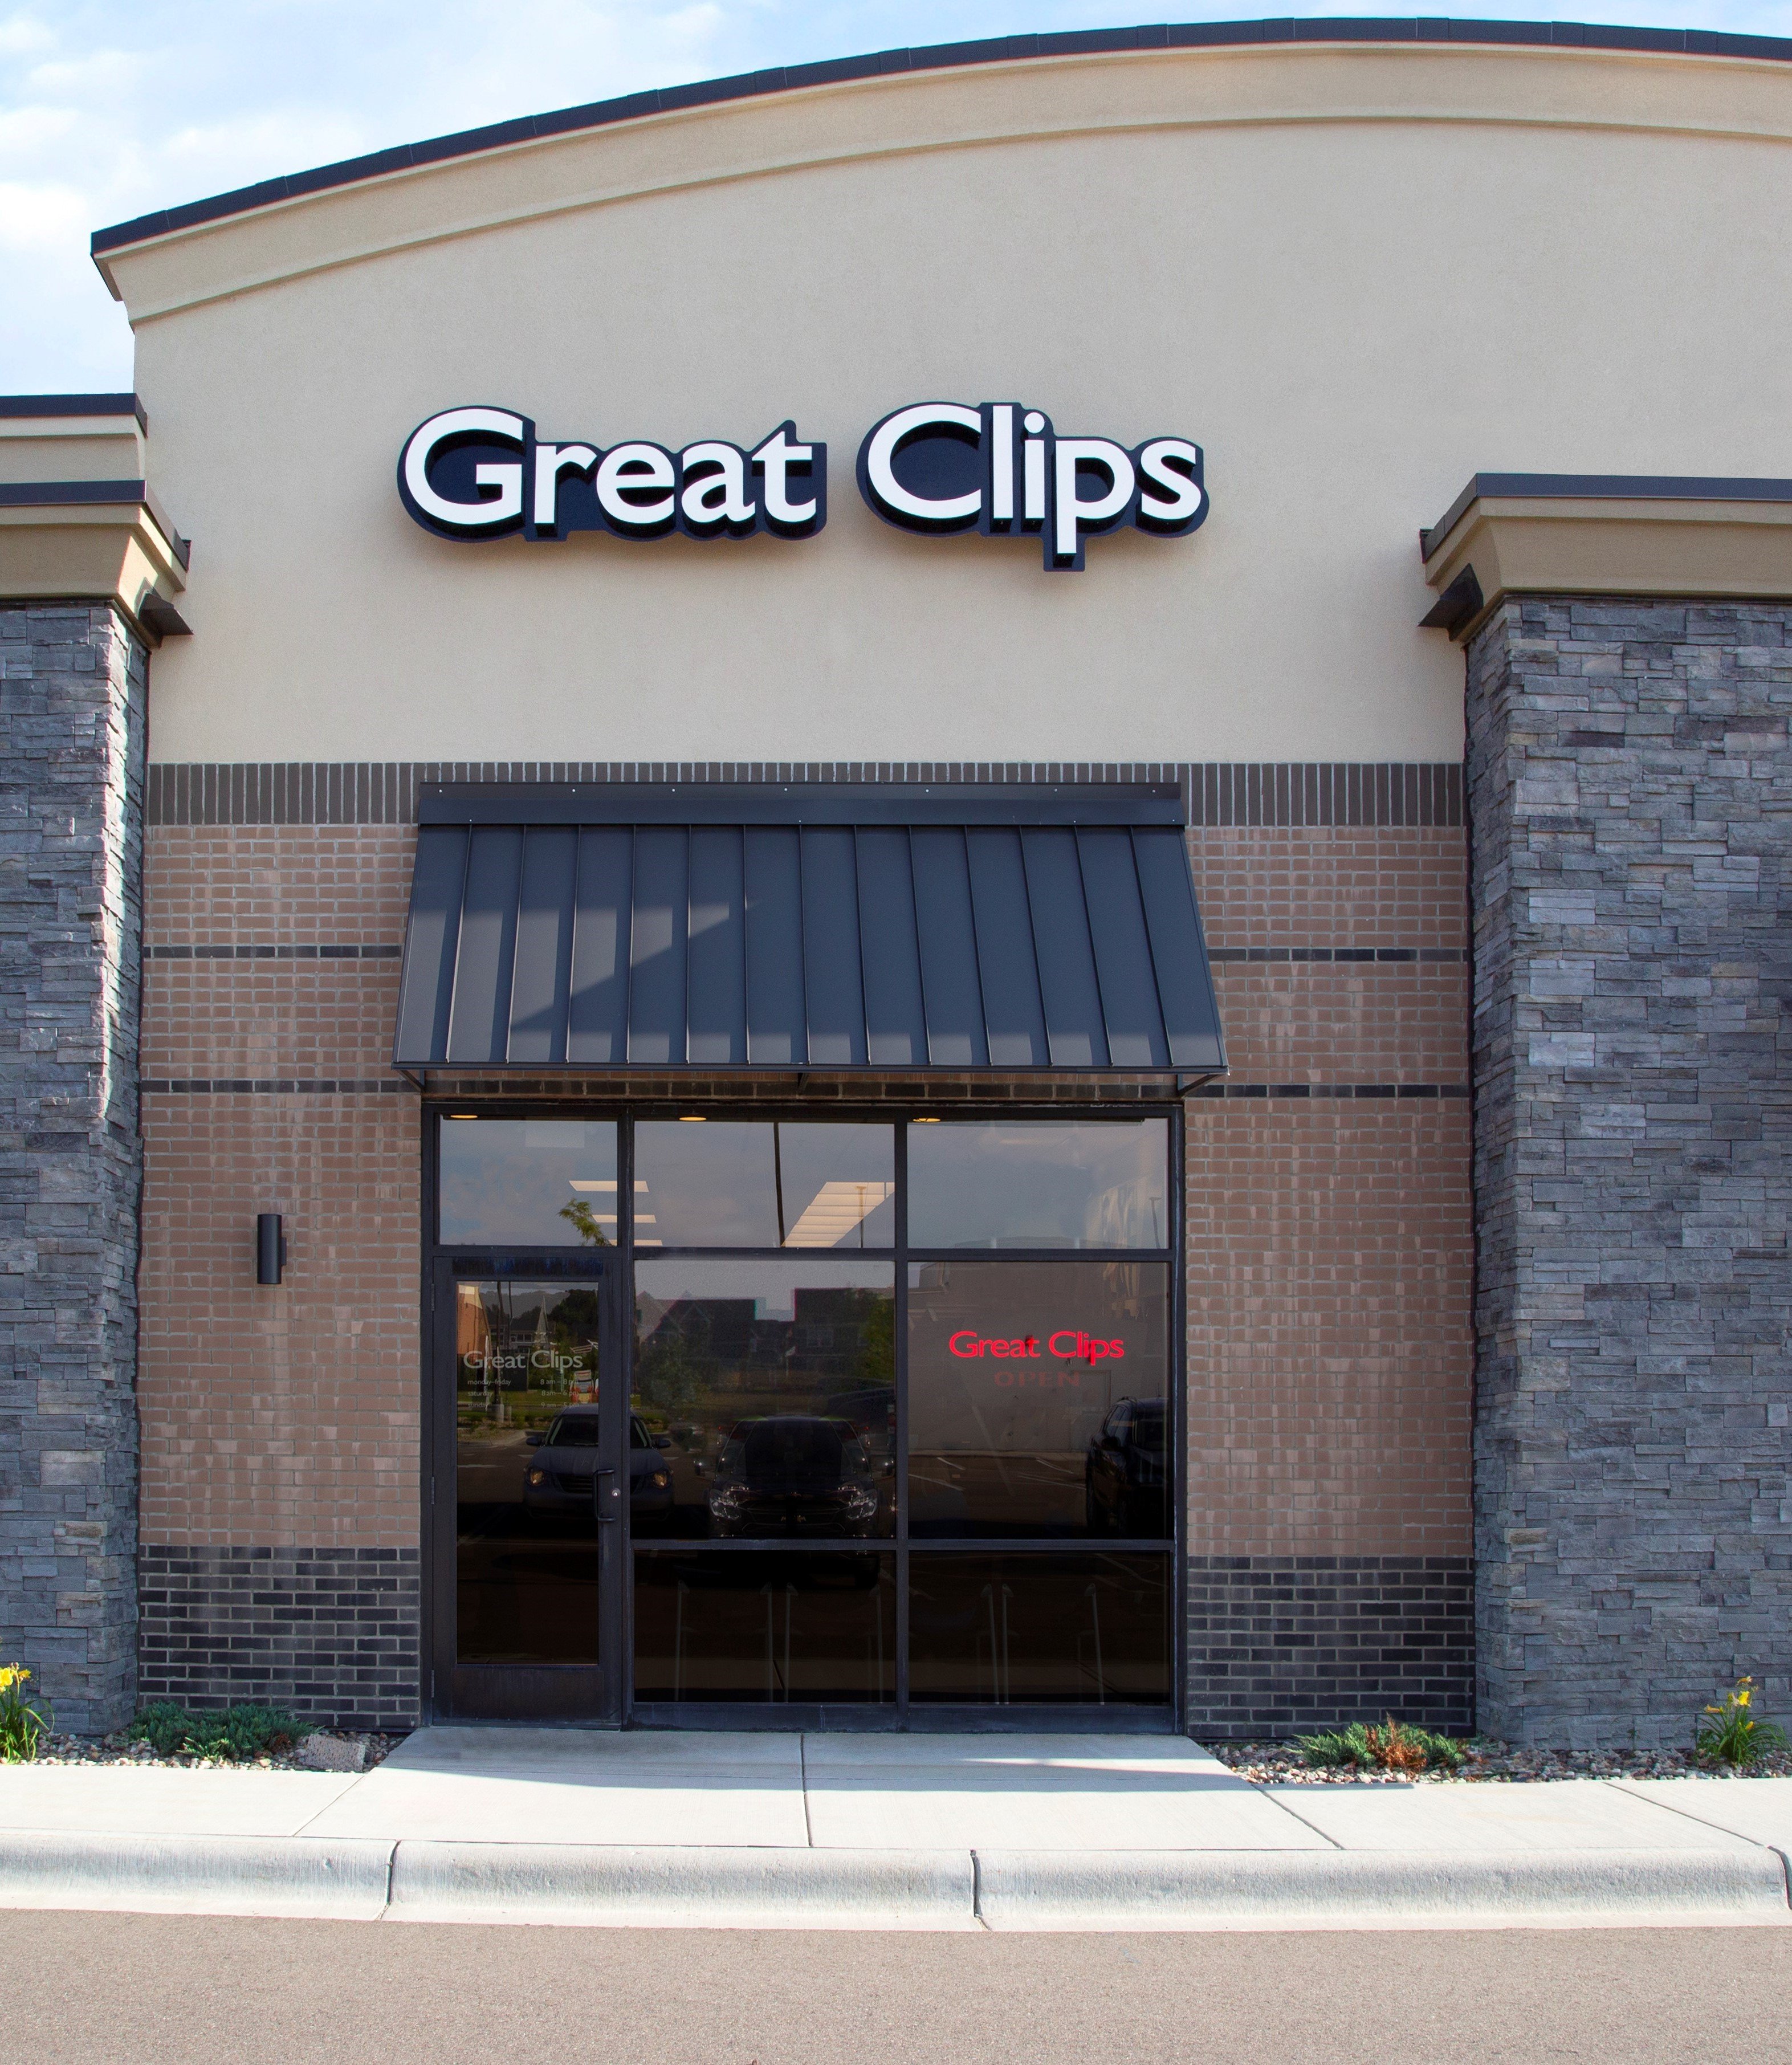 Great clips quin lane